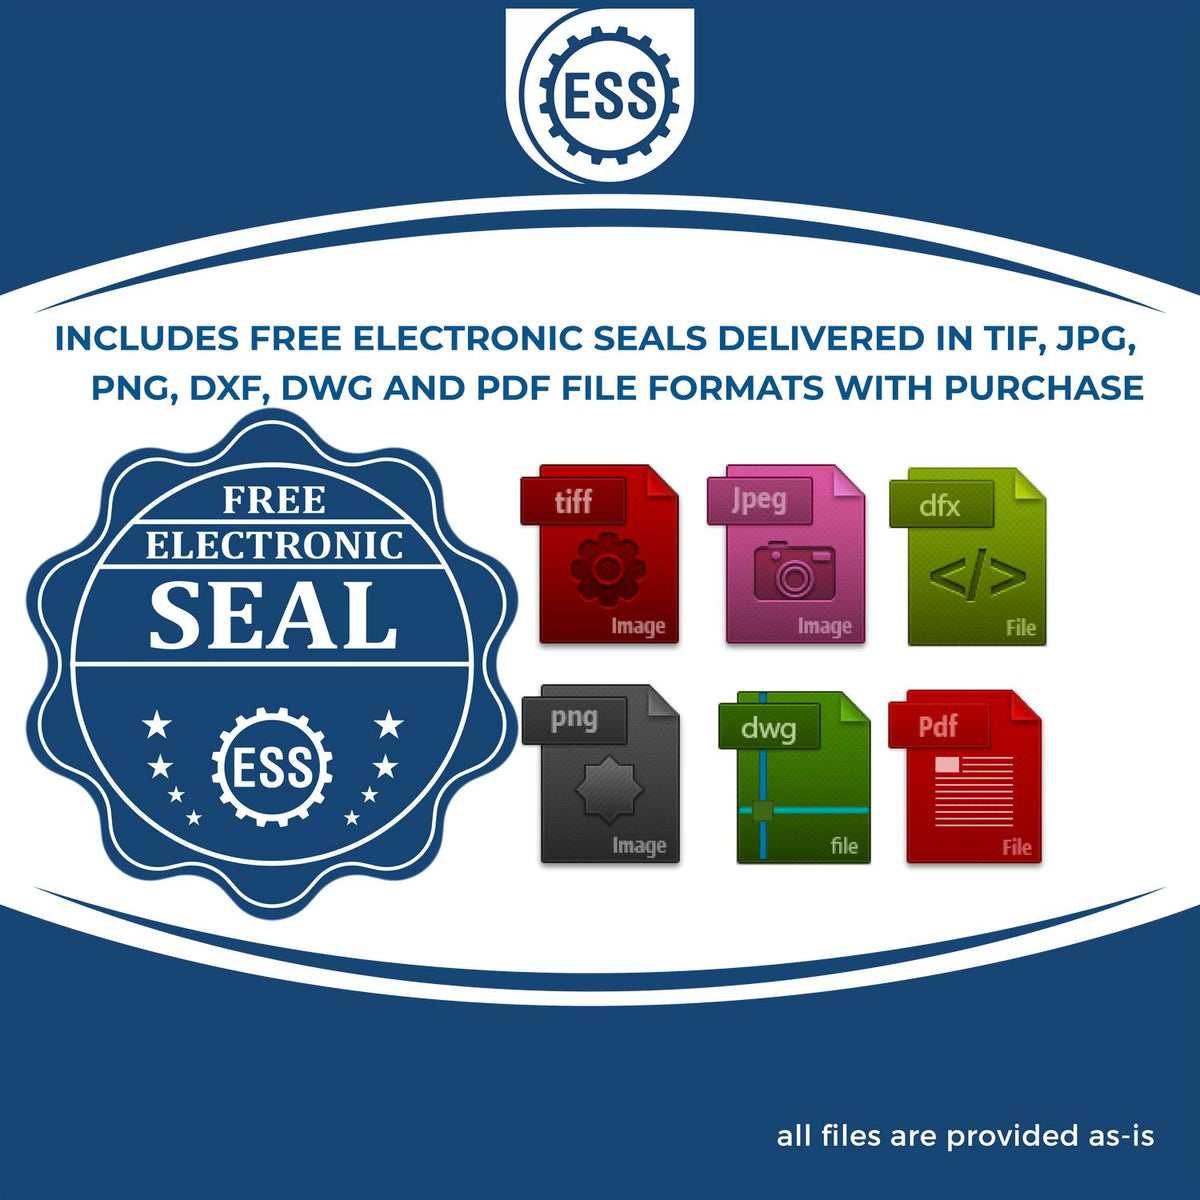 An infographic for the free electronic seal for the Slim Pre-Inked Nevada Professional Geologist Seal Stamp illustrating the different file type icons such as DXF, DWG, TIF, JPG and PNG.